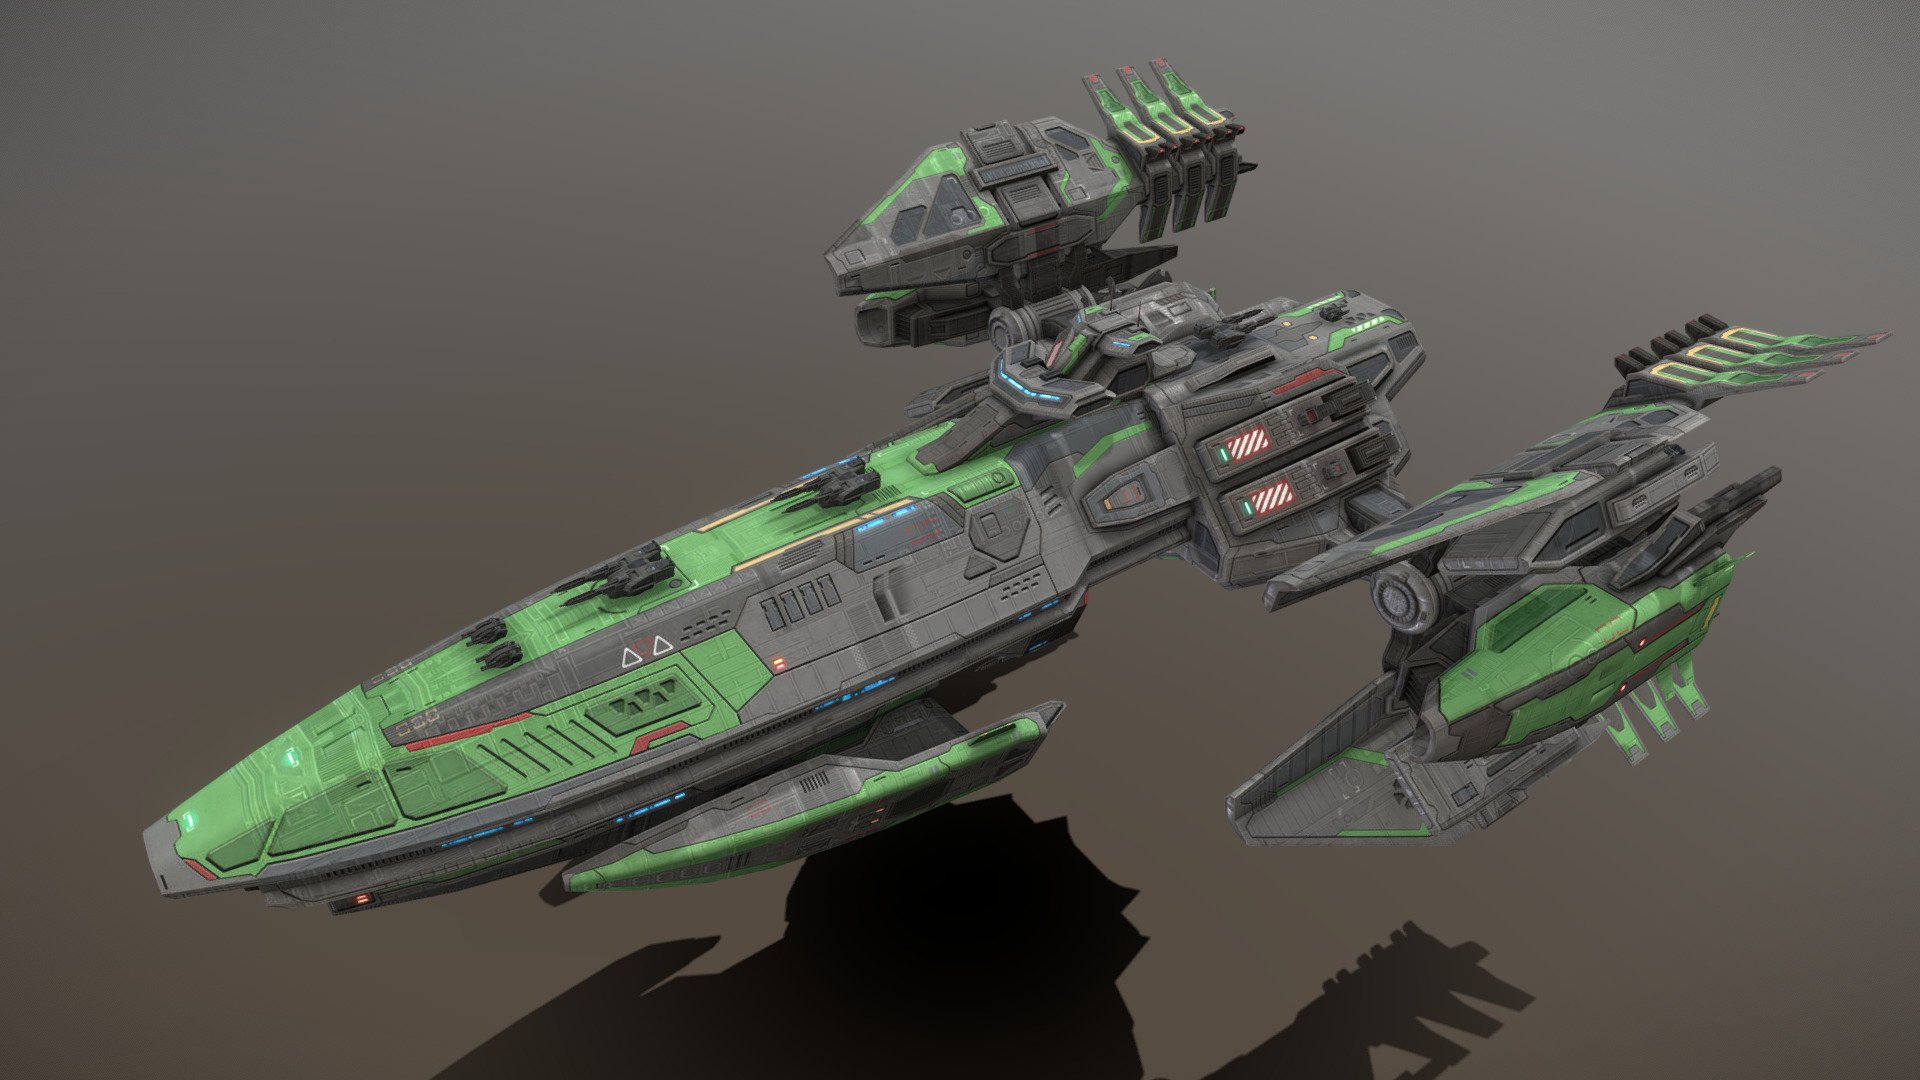 This is a model of a low-poly and game-ready scifi spaceship. 

The weapons are separate meshes and can be animated with a keyframe animation tool. The weapon loadout can be changed too. 

The model has several modular parts for bridge, engine and side modules. These parts can be changed to create different looking ships.

This model has optional maneuvering thrusters for newtonian physics based movement. They do fit on other ships too.

The model comes with several differently colored texture sets. The PSD file with intact layers is included.

Please note: The textures in the Sketchfab viewer have a reduced resolution (2K instead of 4K) to improve Sketchfab loading speed.

If you have purchased this model please make sure to download the “additional file”.  It contains FBX and OBJ meshes, full resolution textures and the source PSDs with intact layers. The meshes are separate and can be animated (e.g. firing animations for gun barrels, rotating turrets, etc) 3d model